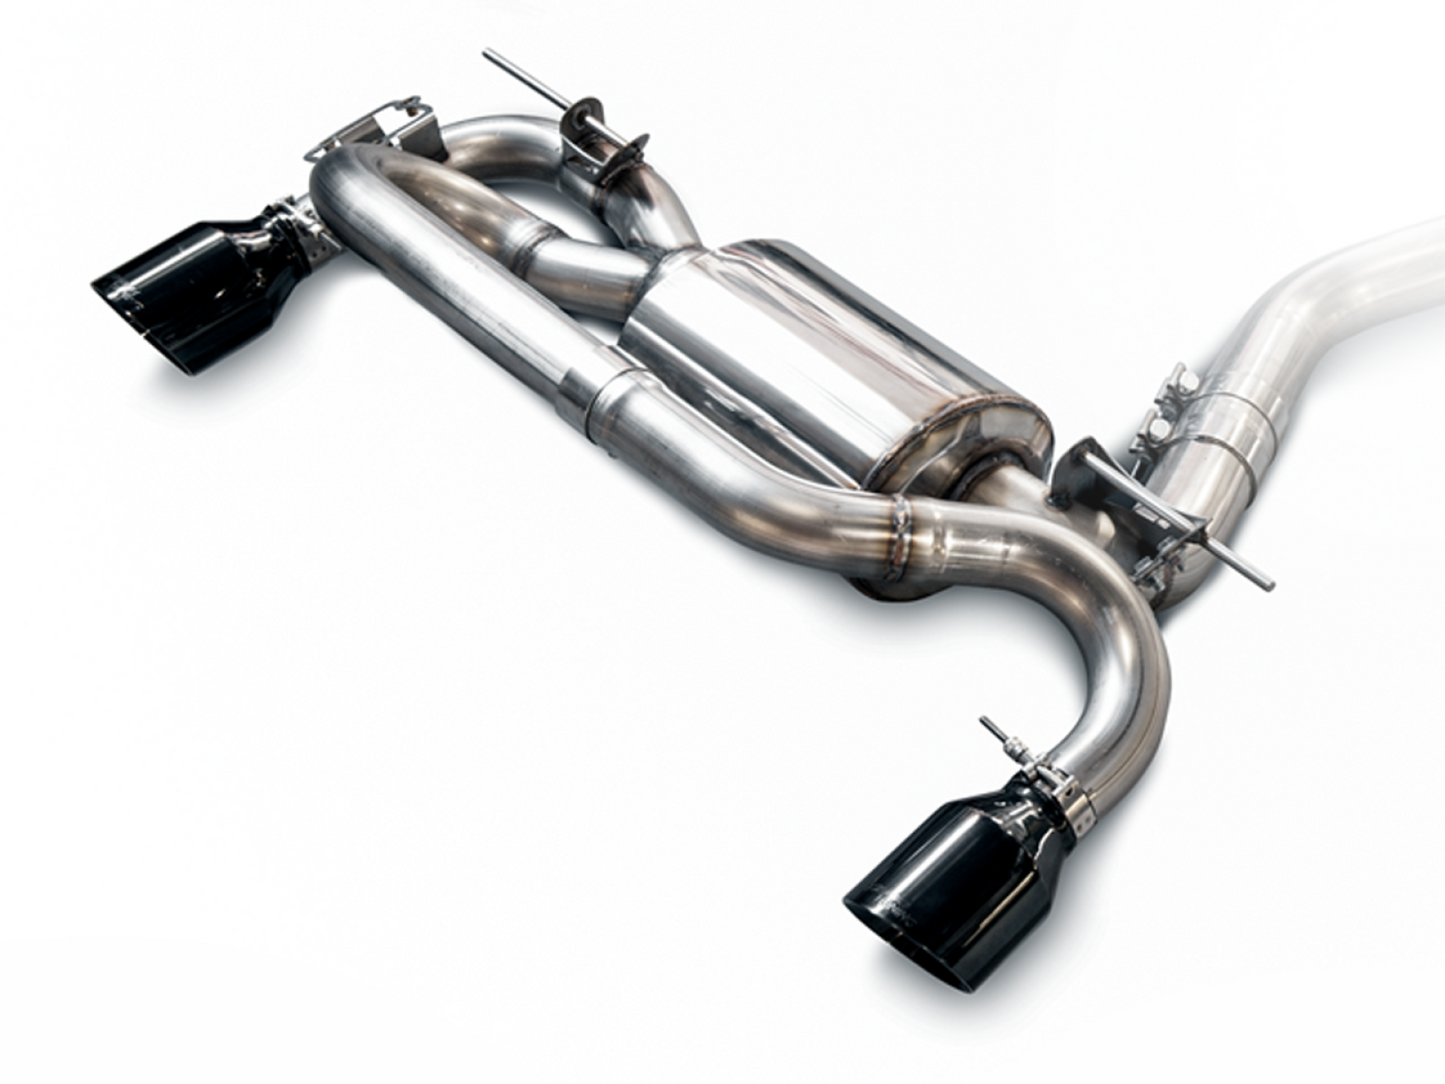 AWE Tuning Touring Edition Axle-back Exhaust for BMW F22 M235i / M240i - Diamond Black Tips (102mm) 3010-33034